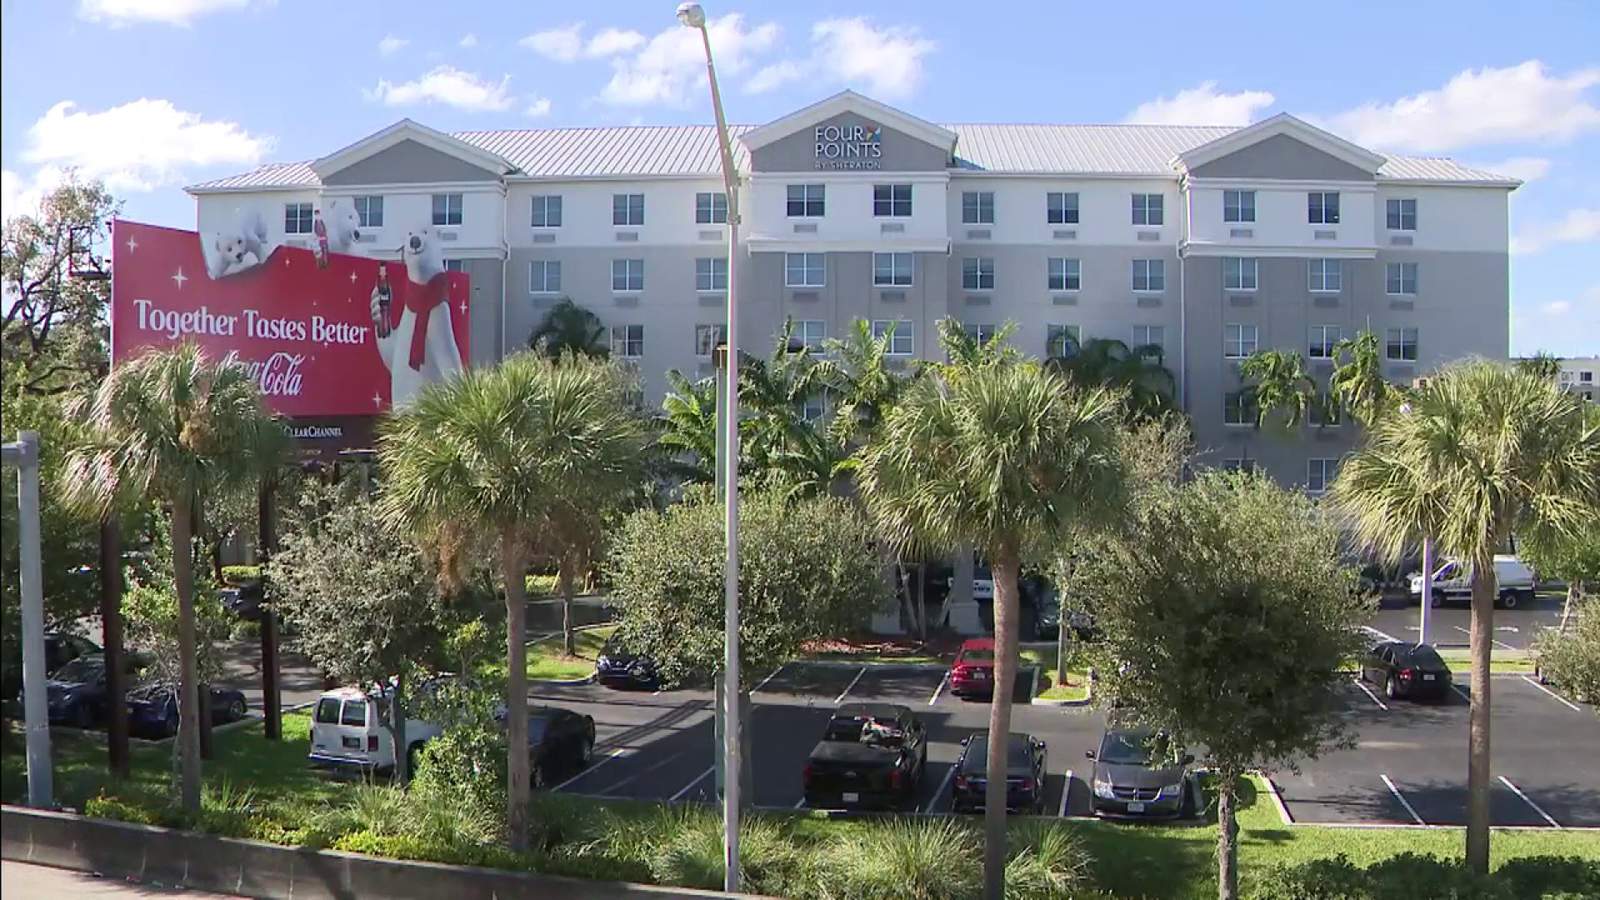 Homicide detectives investigating after woman’s body found inside Dania Beach hotel room